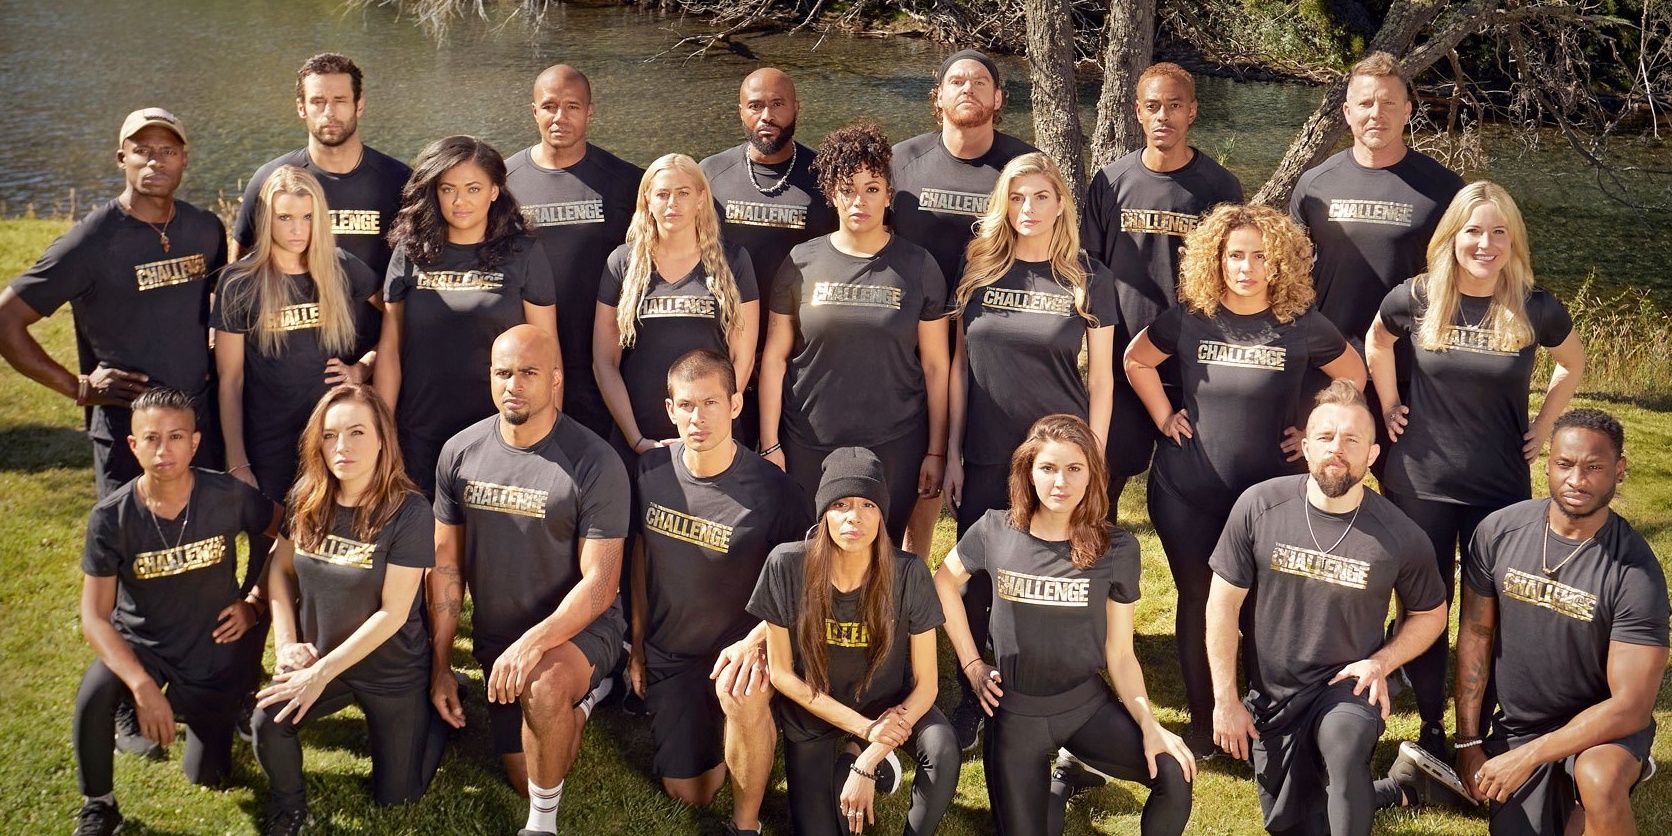 An image of the contestants posing together on The Challenge